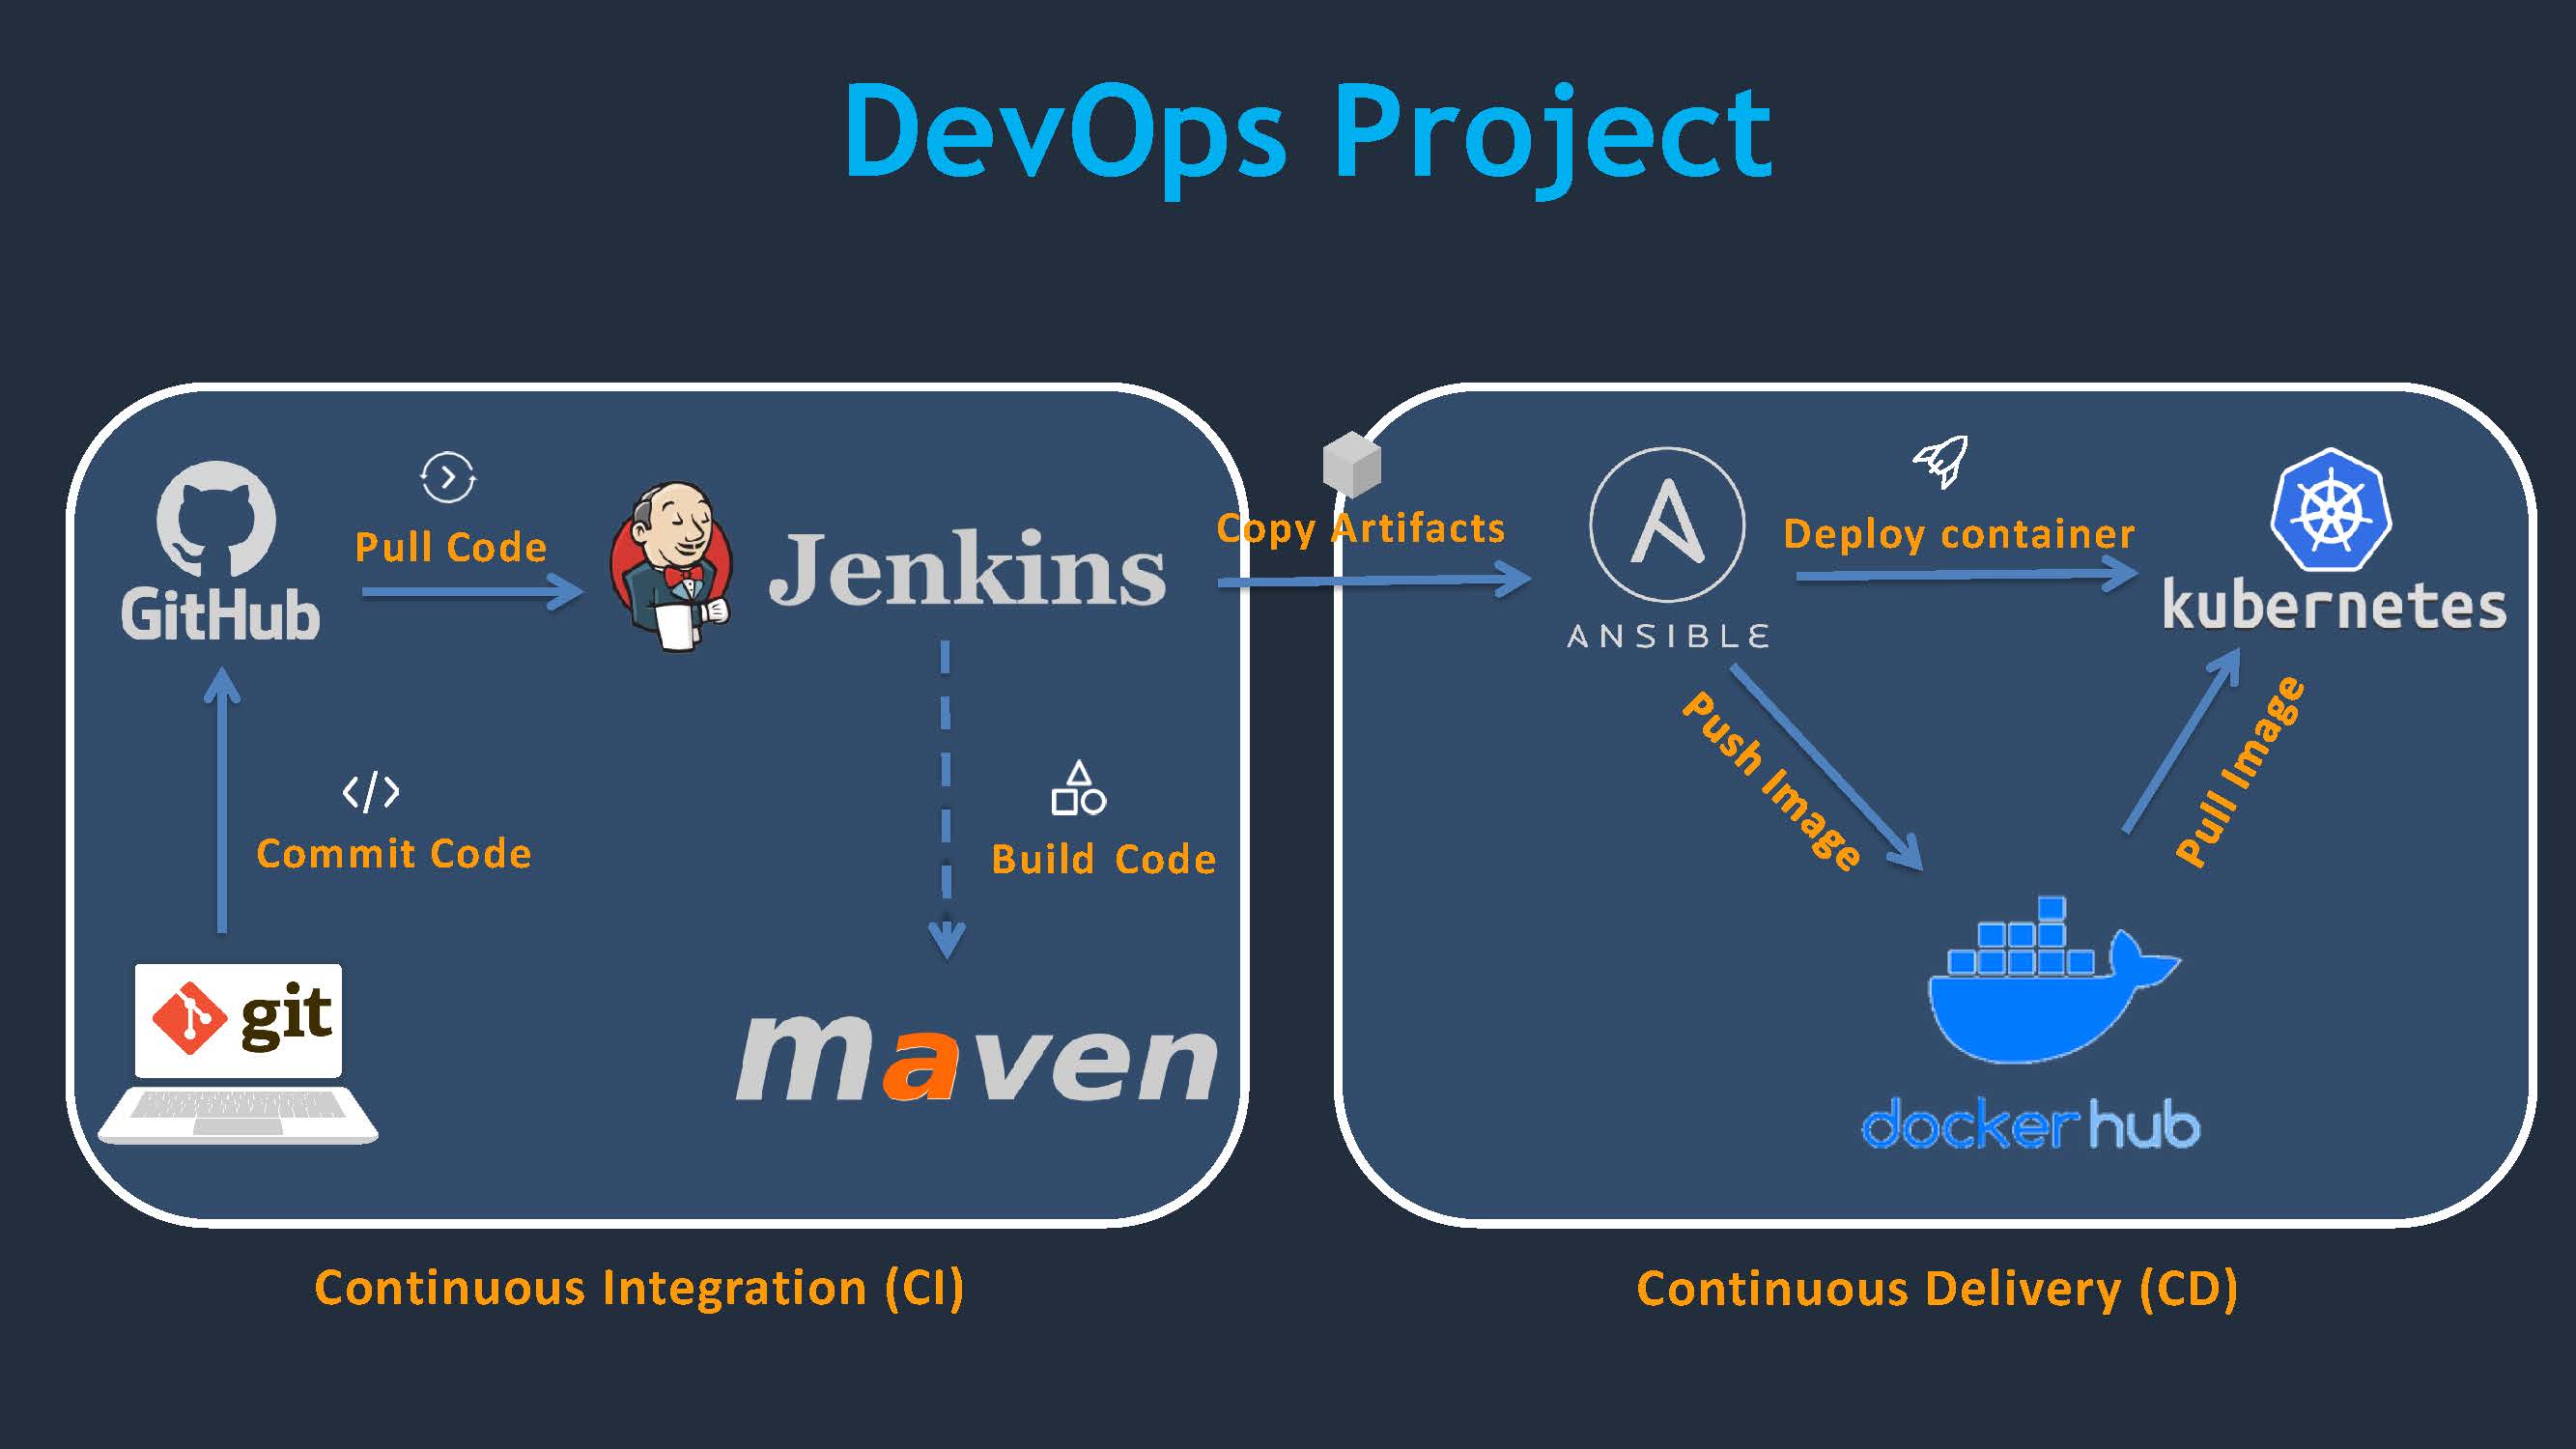 Hands-on practical project for creating DevOps CI/CD pipelines